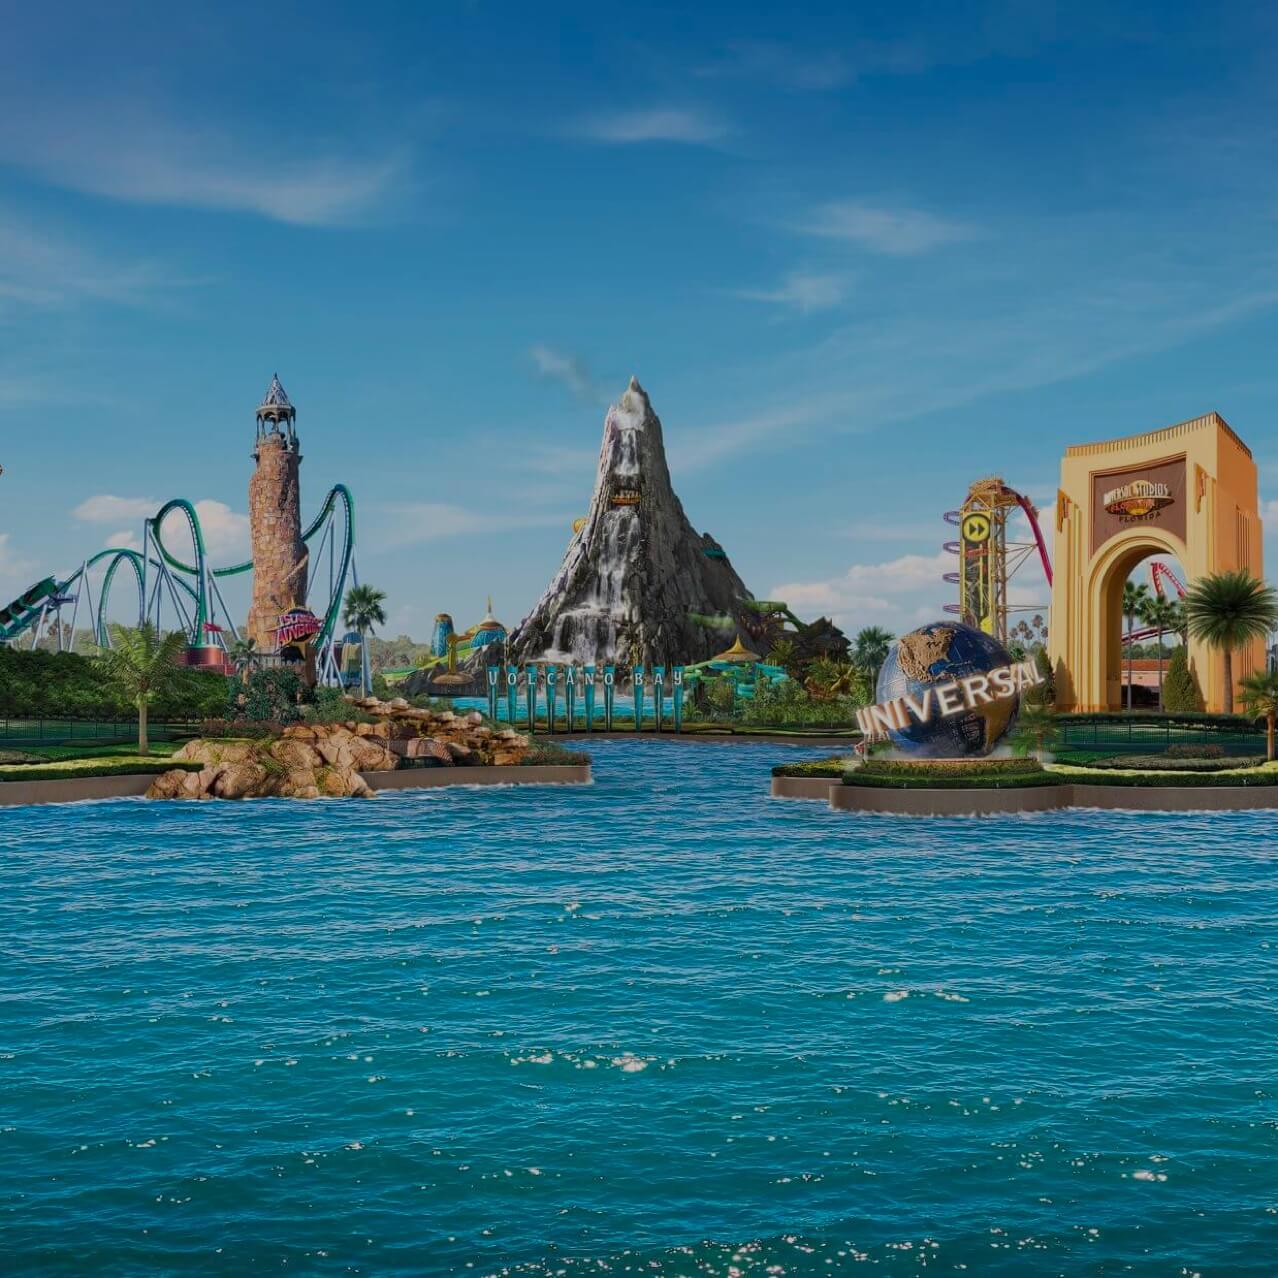 Islands of Adventure vs Universal Studios: Which One is Better?